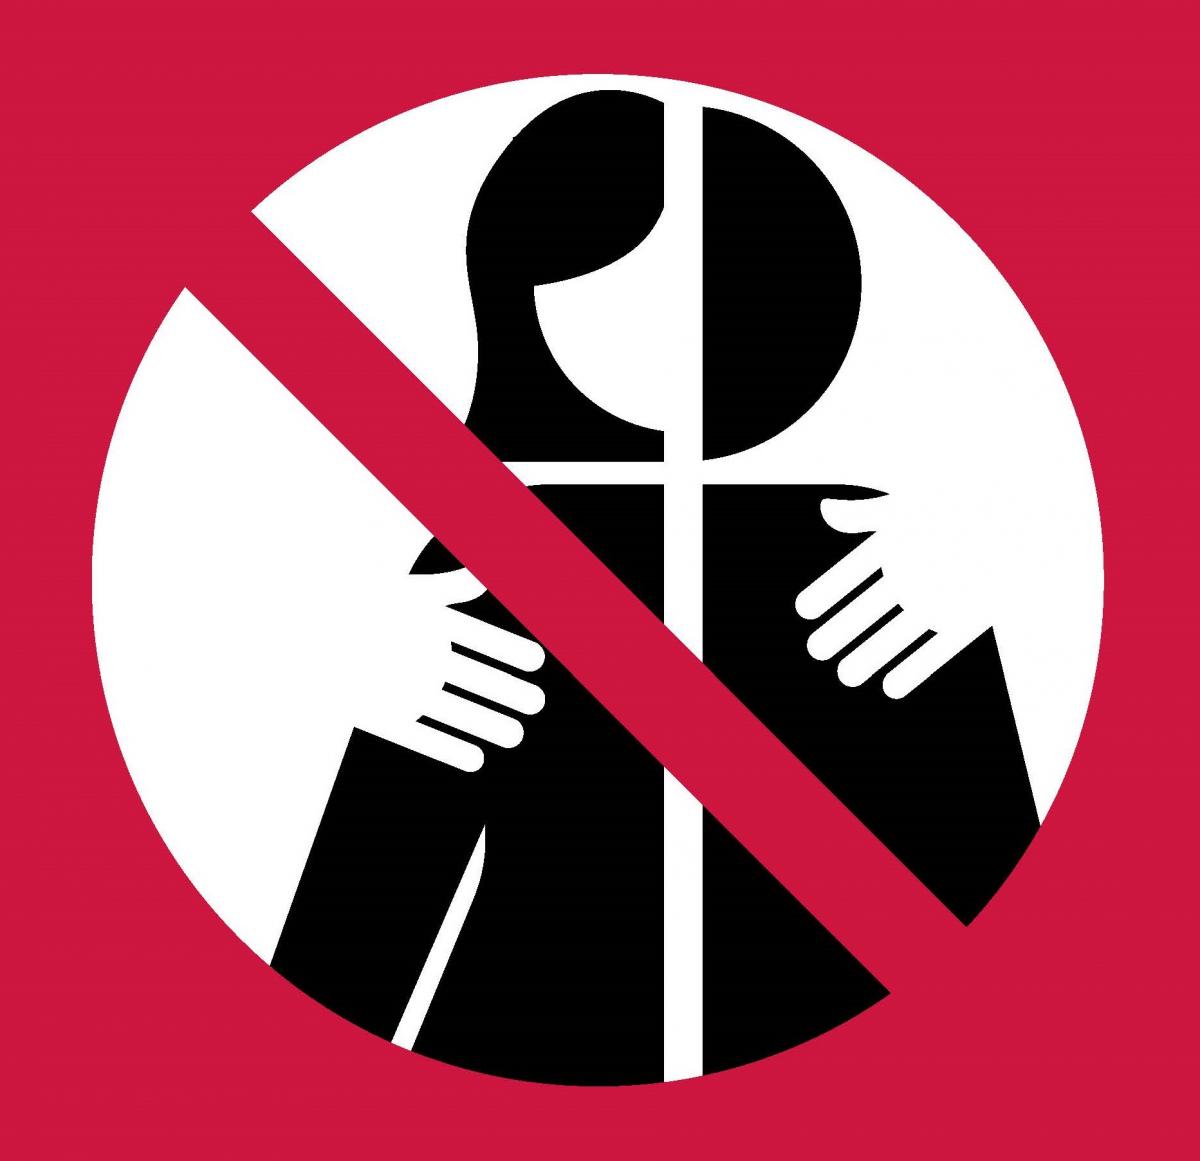 New symbol with hands off body indicating no gender-based harassment